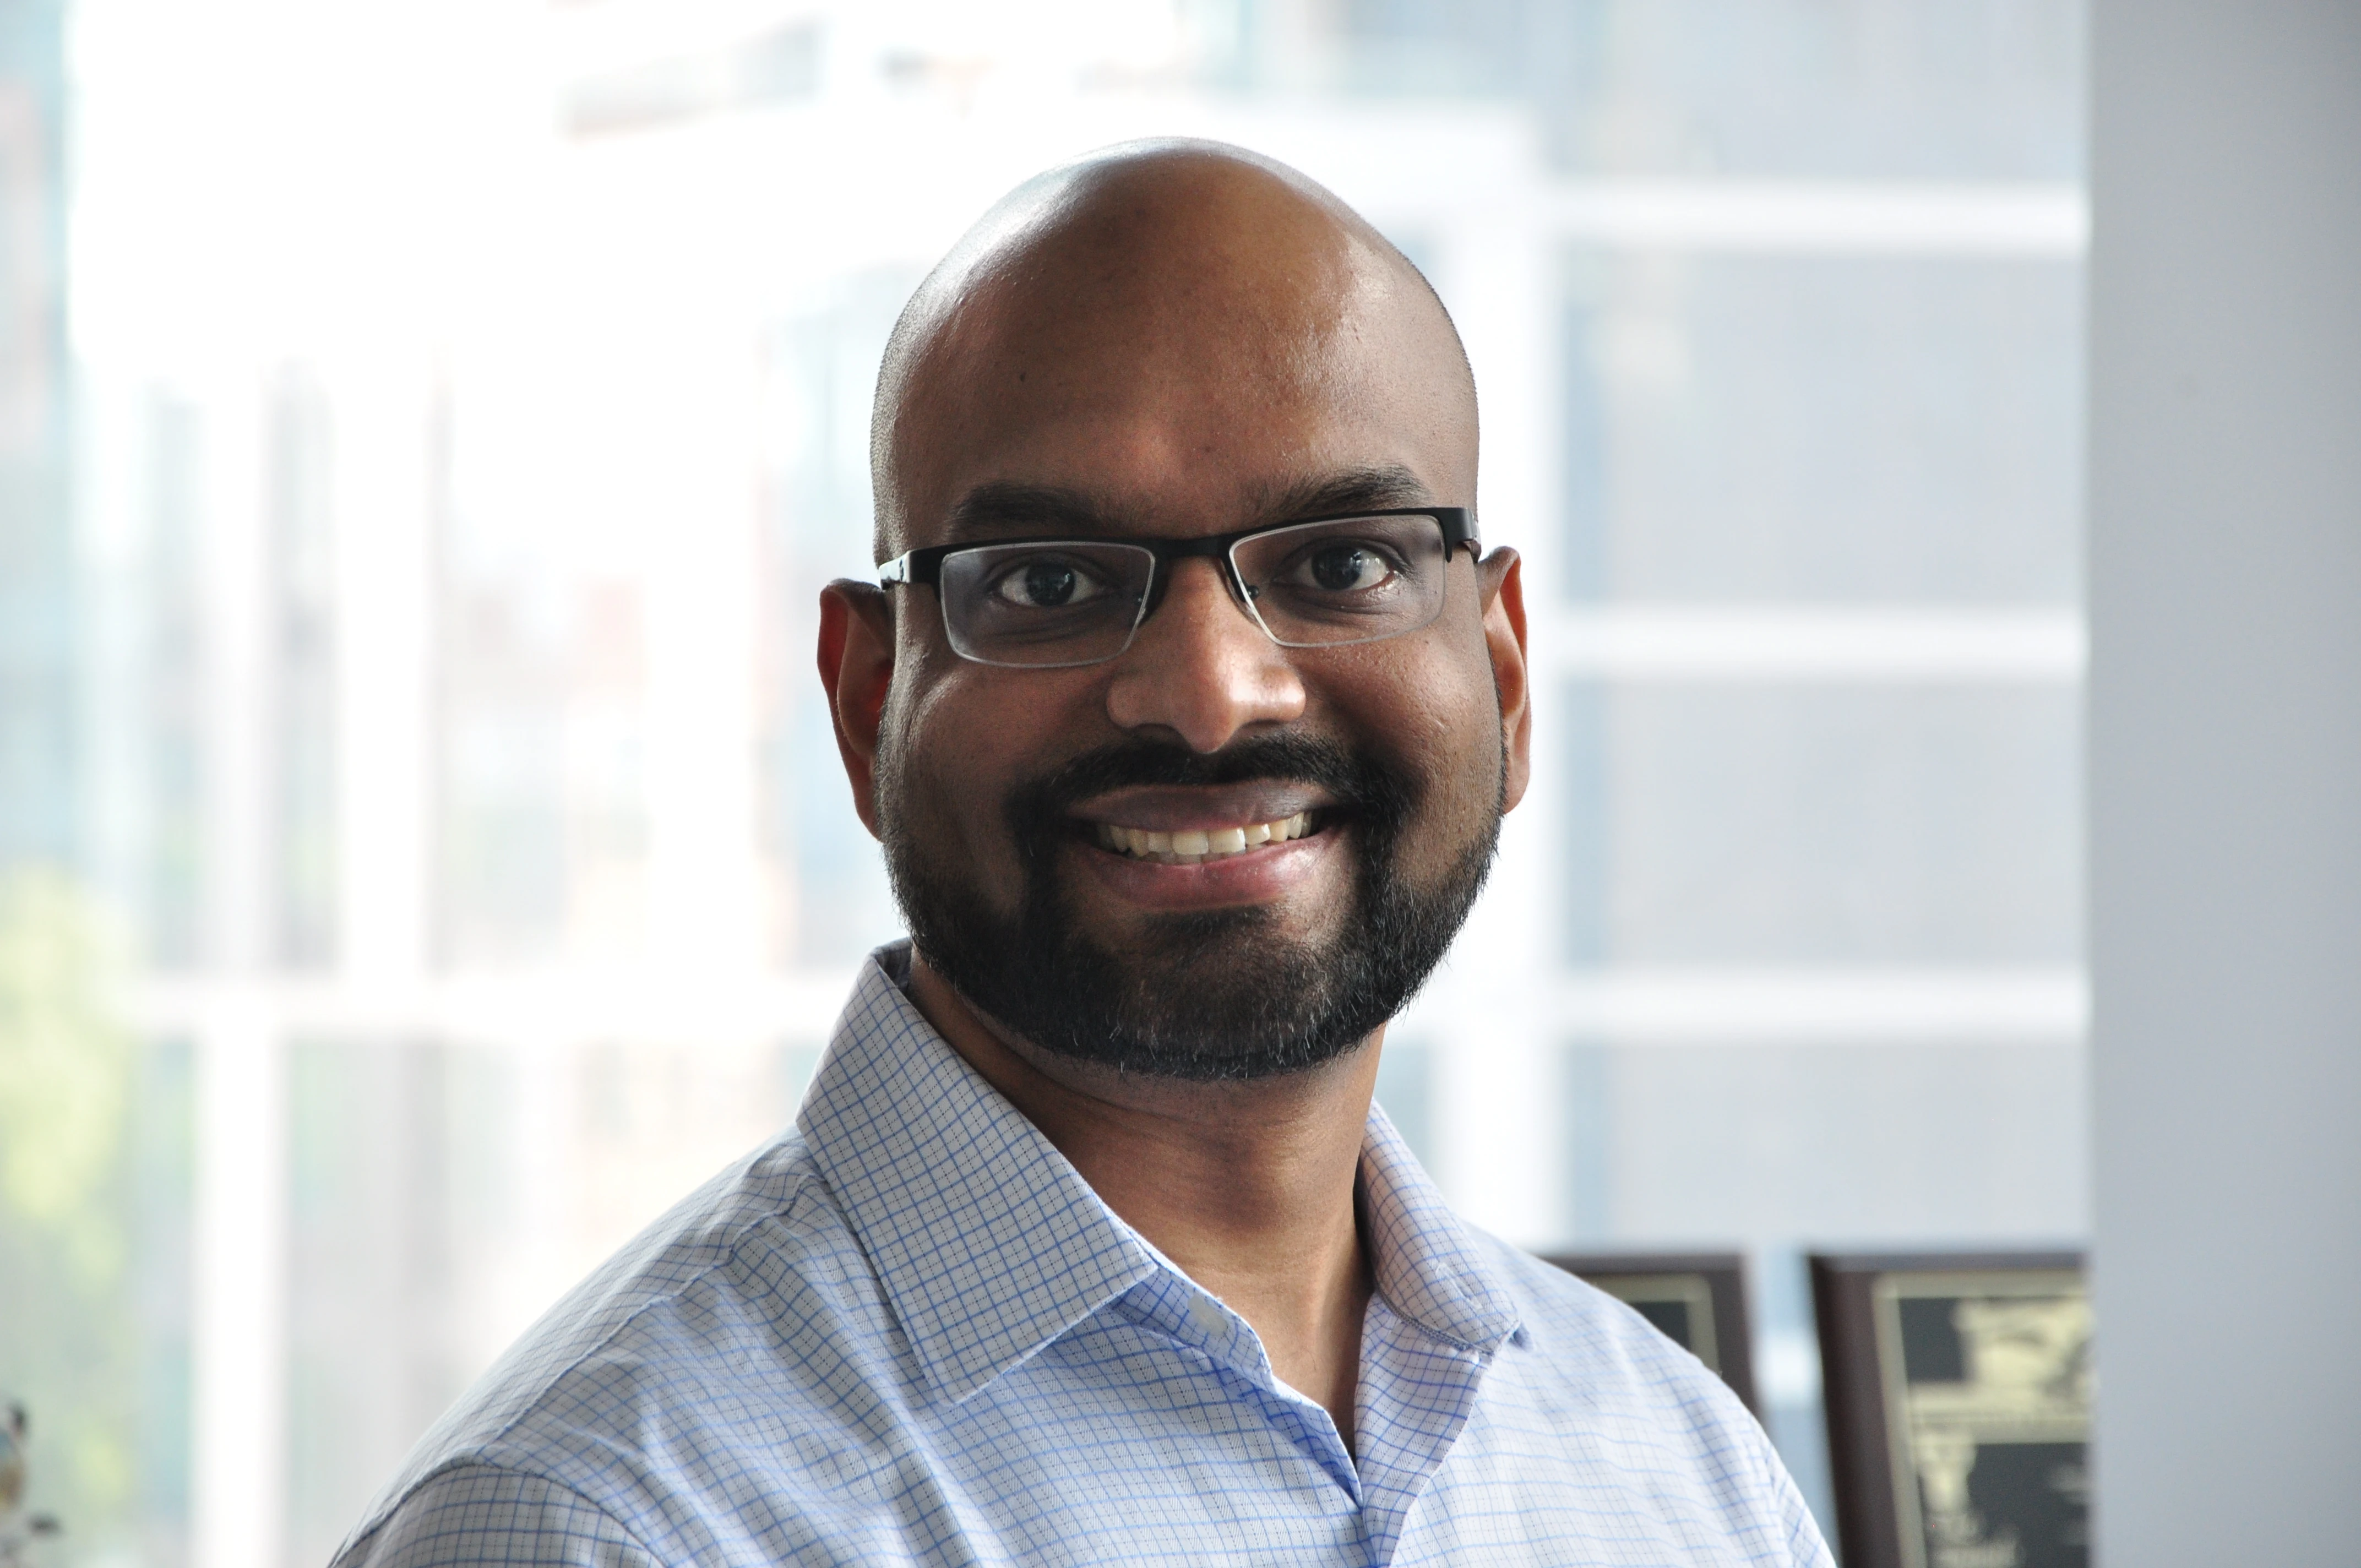 Noel Gunasekar manages the Index Calculations and Data Infrastructure teams inside Indices Engineering at Bloomberg.